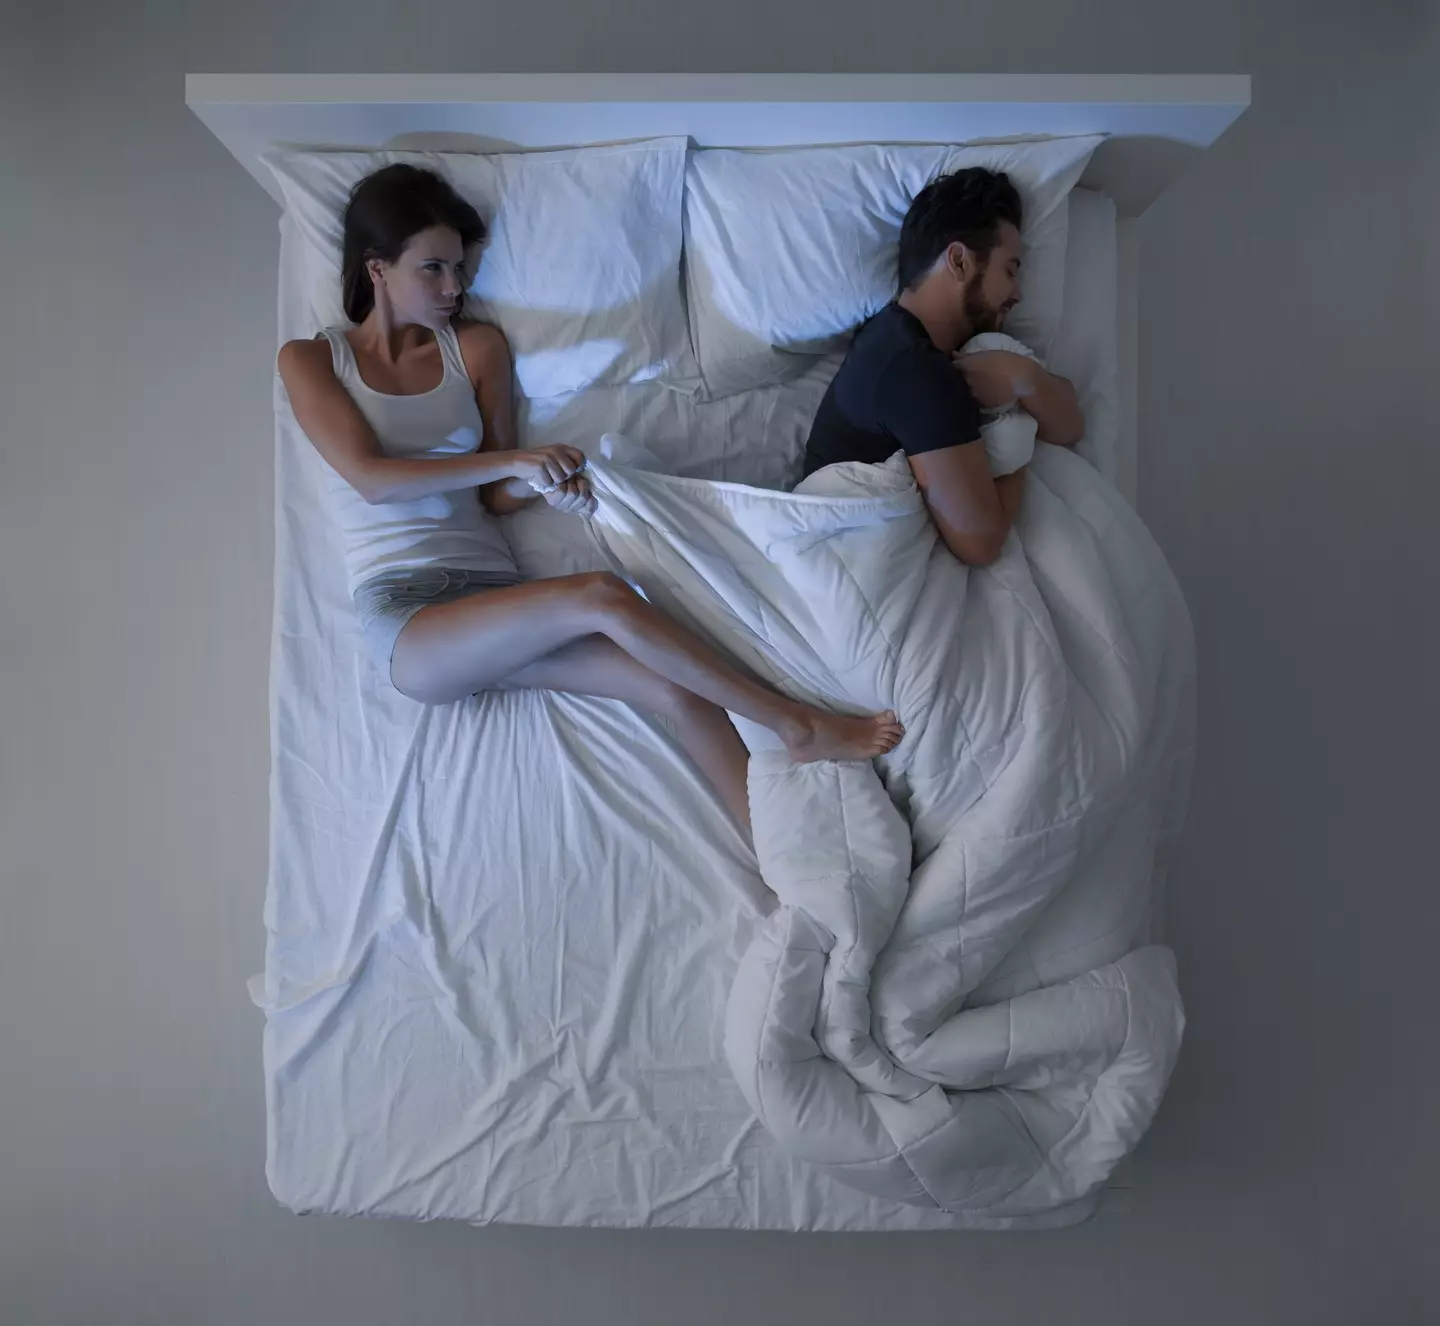 This could end the duvet wars.